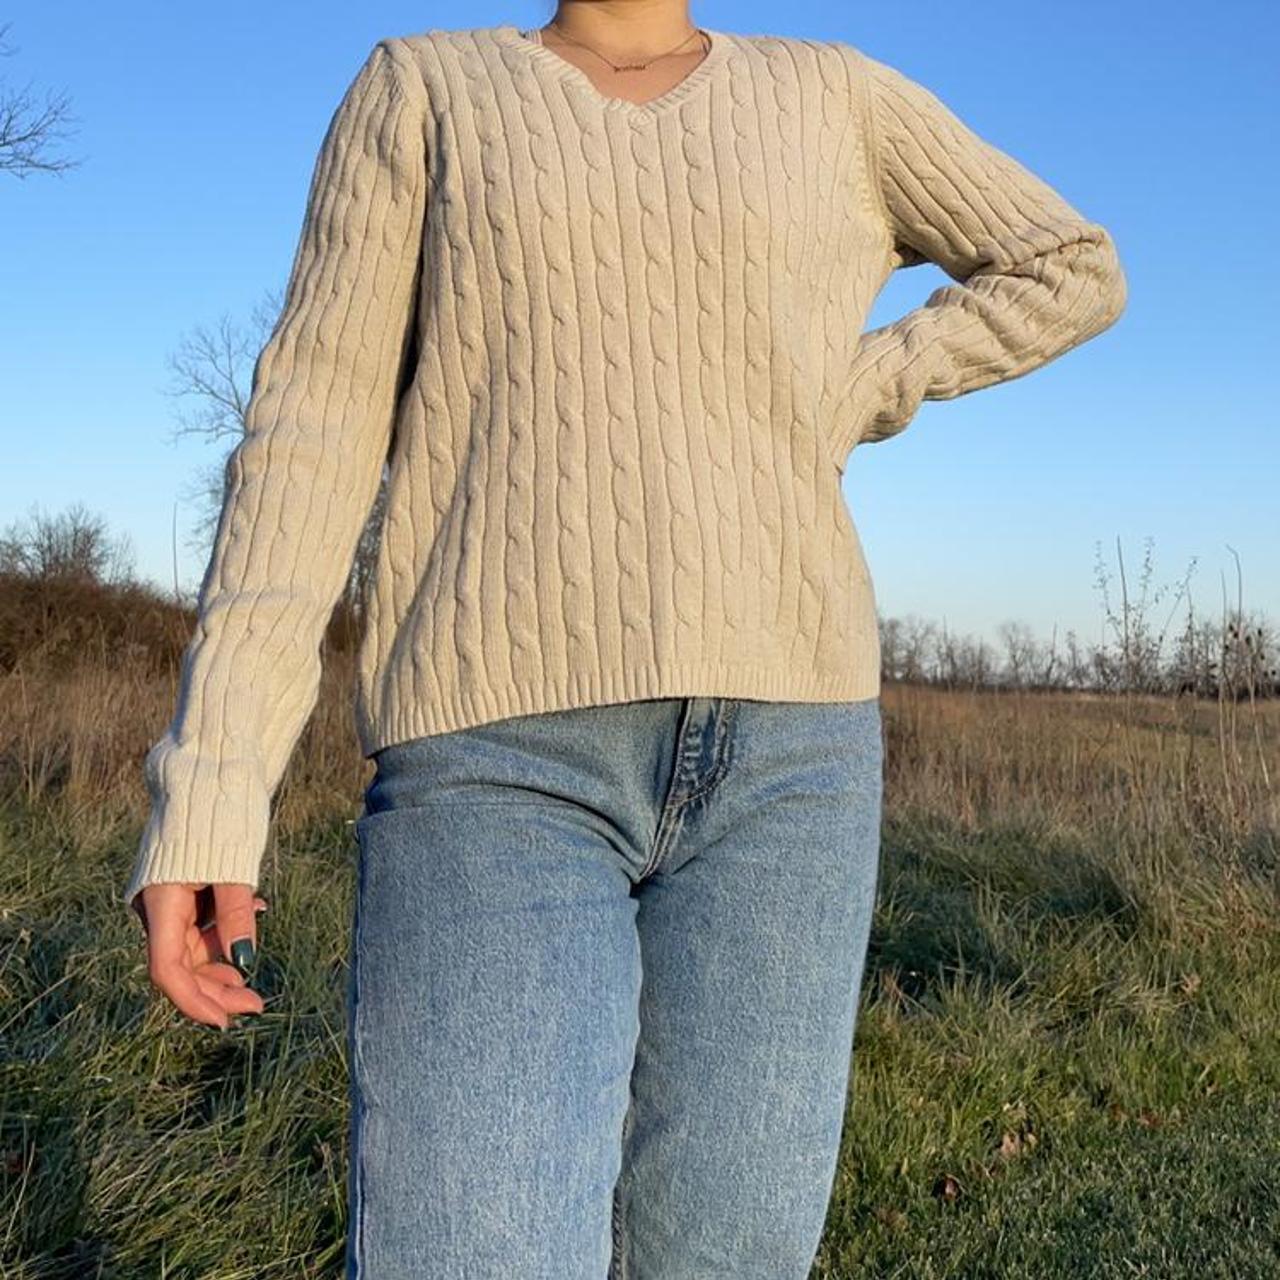 Product Image 2 - cable knit v-neck sweater

tan/beige color
brand: